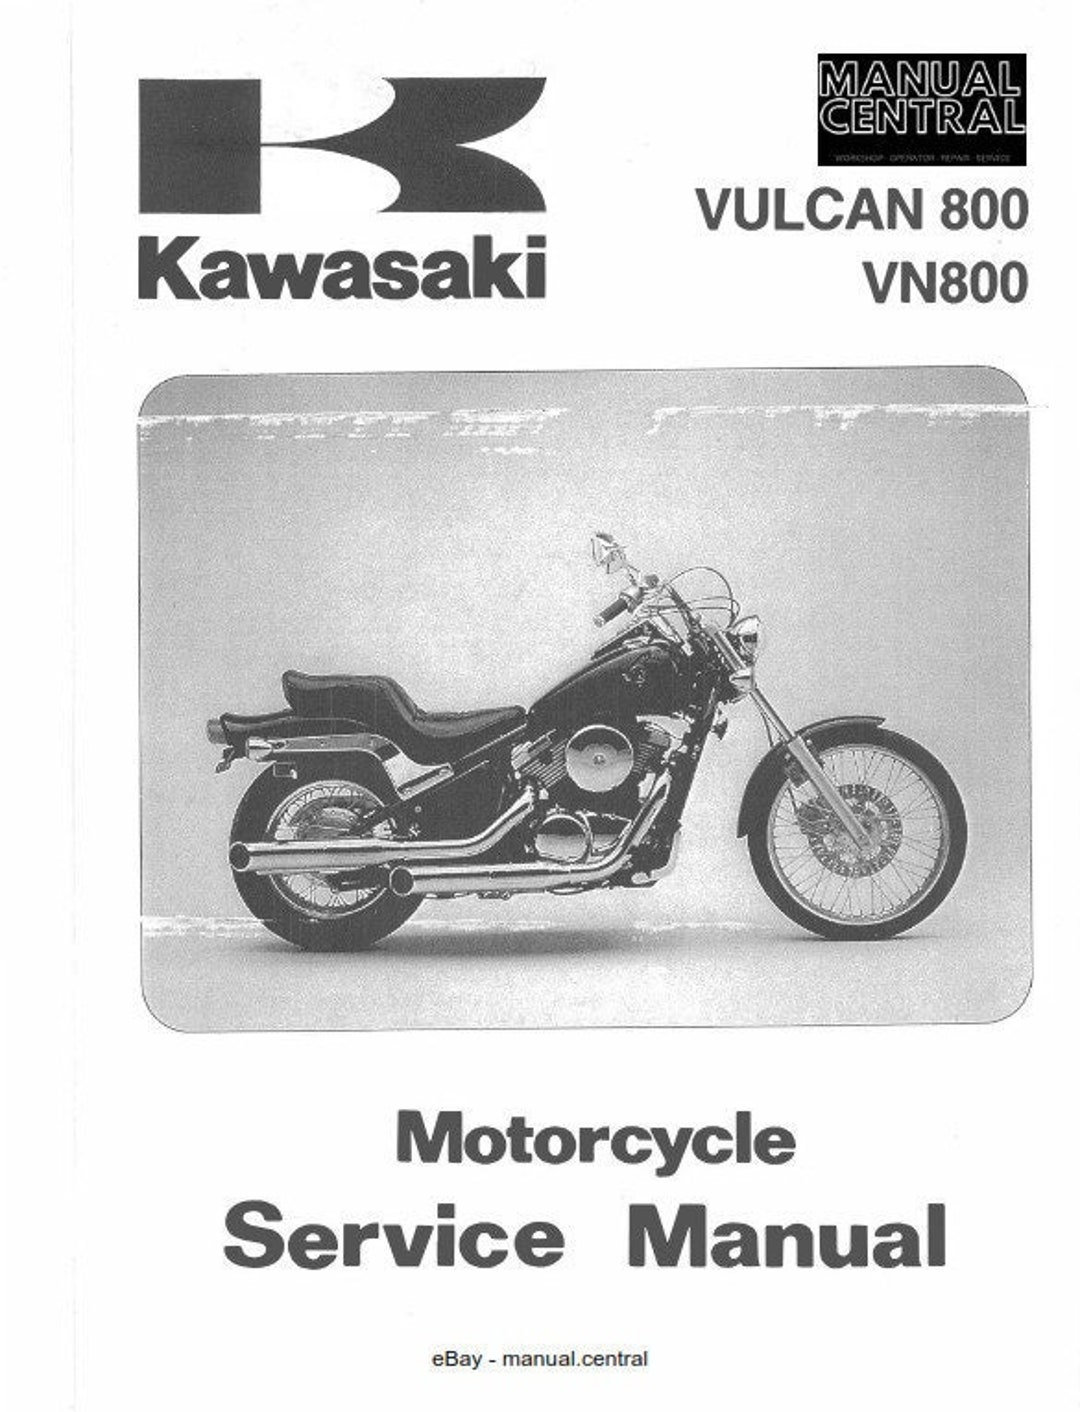 Why is my Kawasaki VN800 Classic not starting?